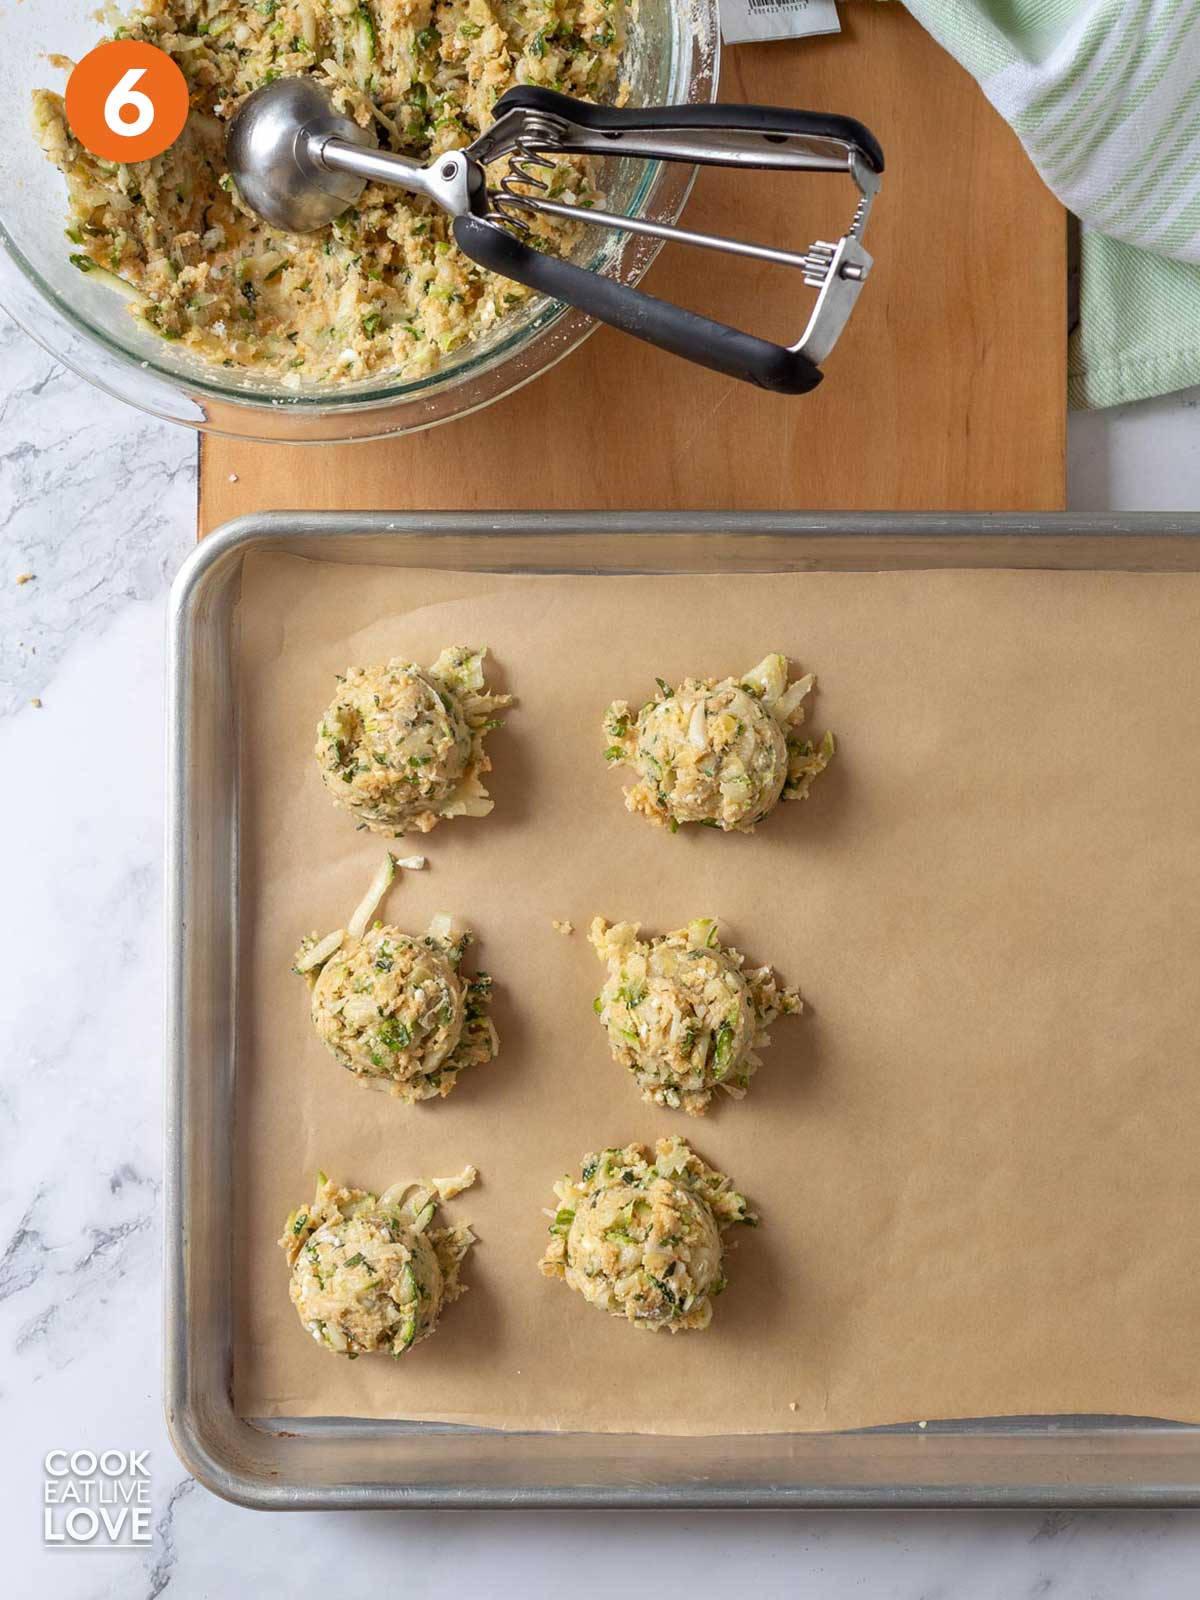 Balls of zucchini fritters scooped onto a baking tray.